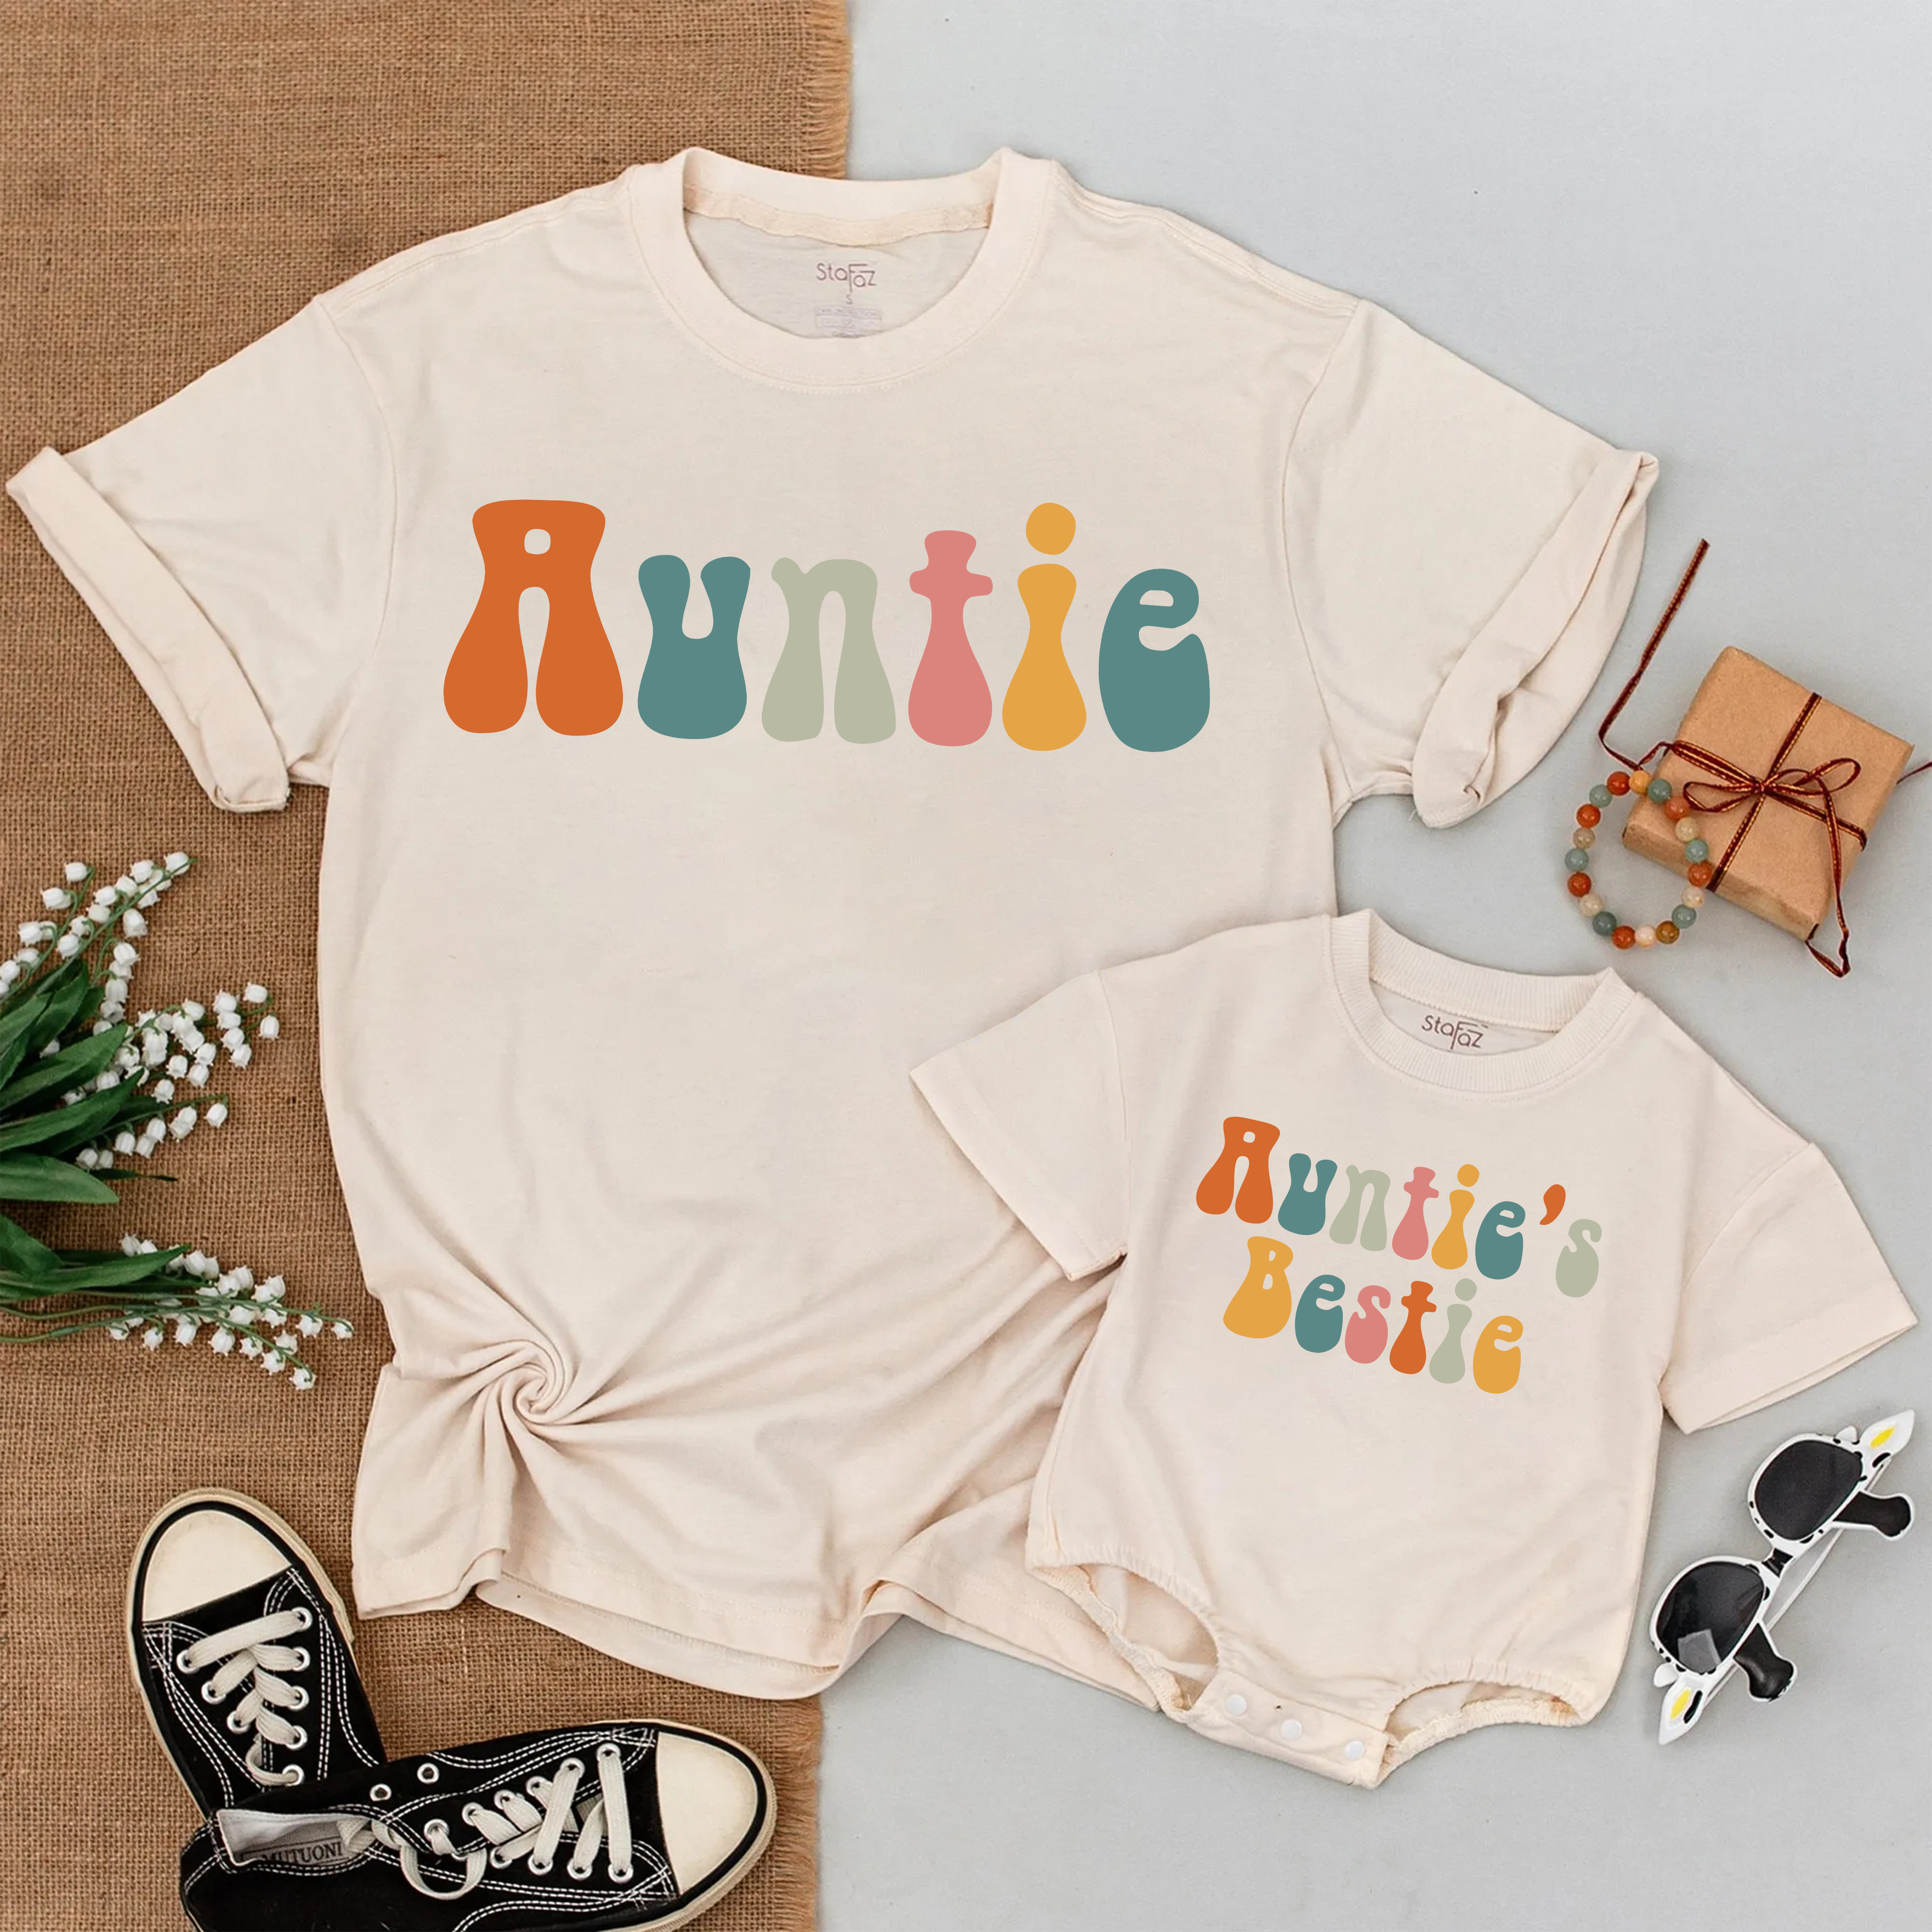 Auntie And Bestie Matching TShirt: Custom Perfect Gift From Aunt!